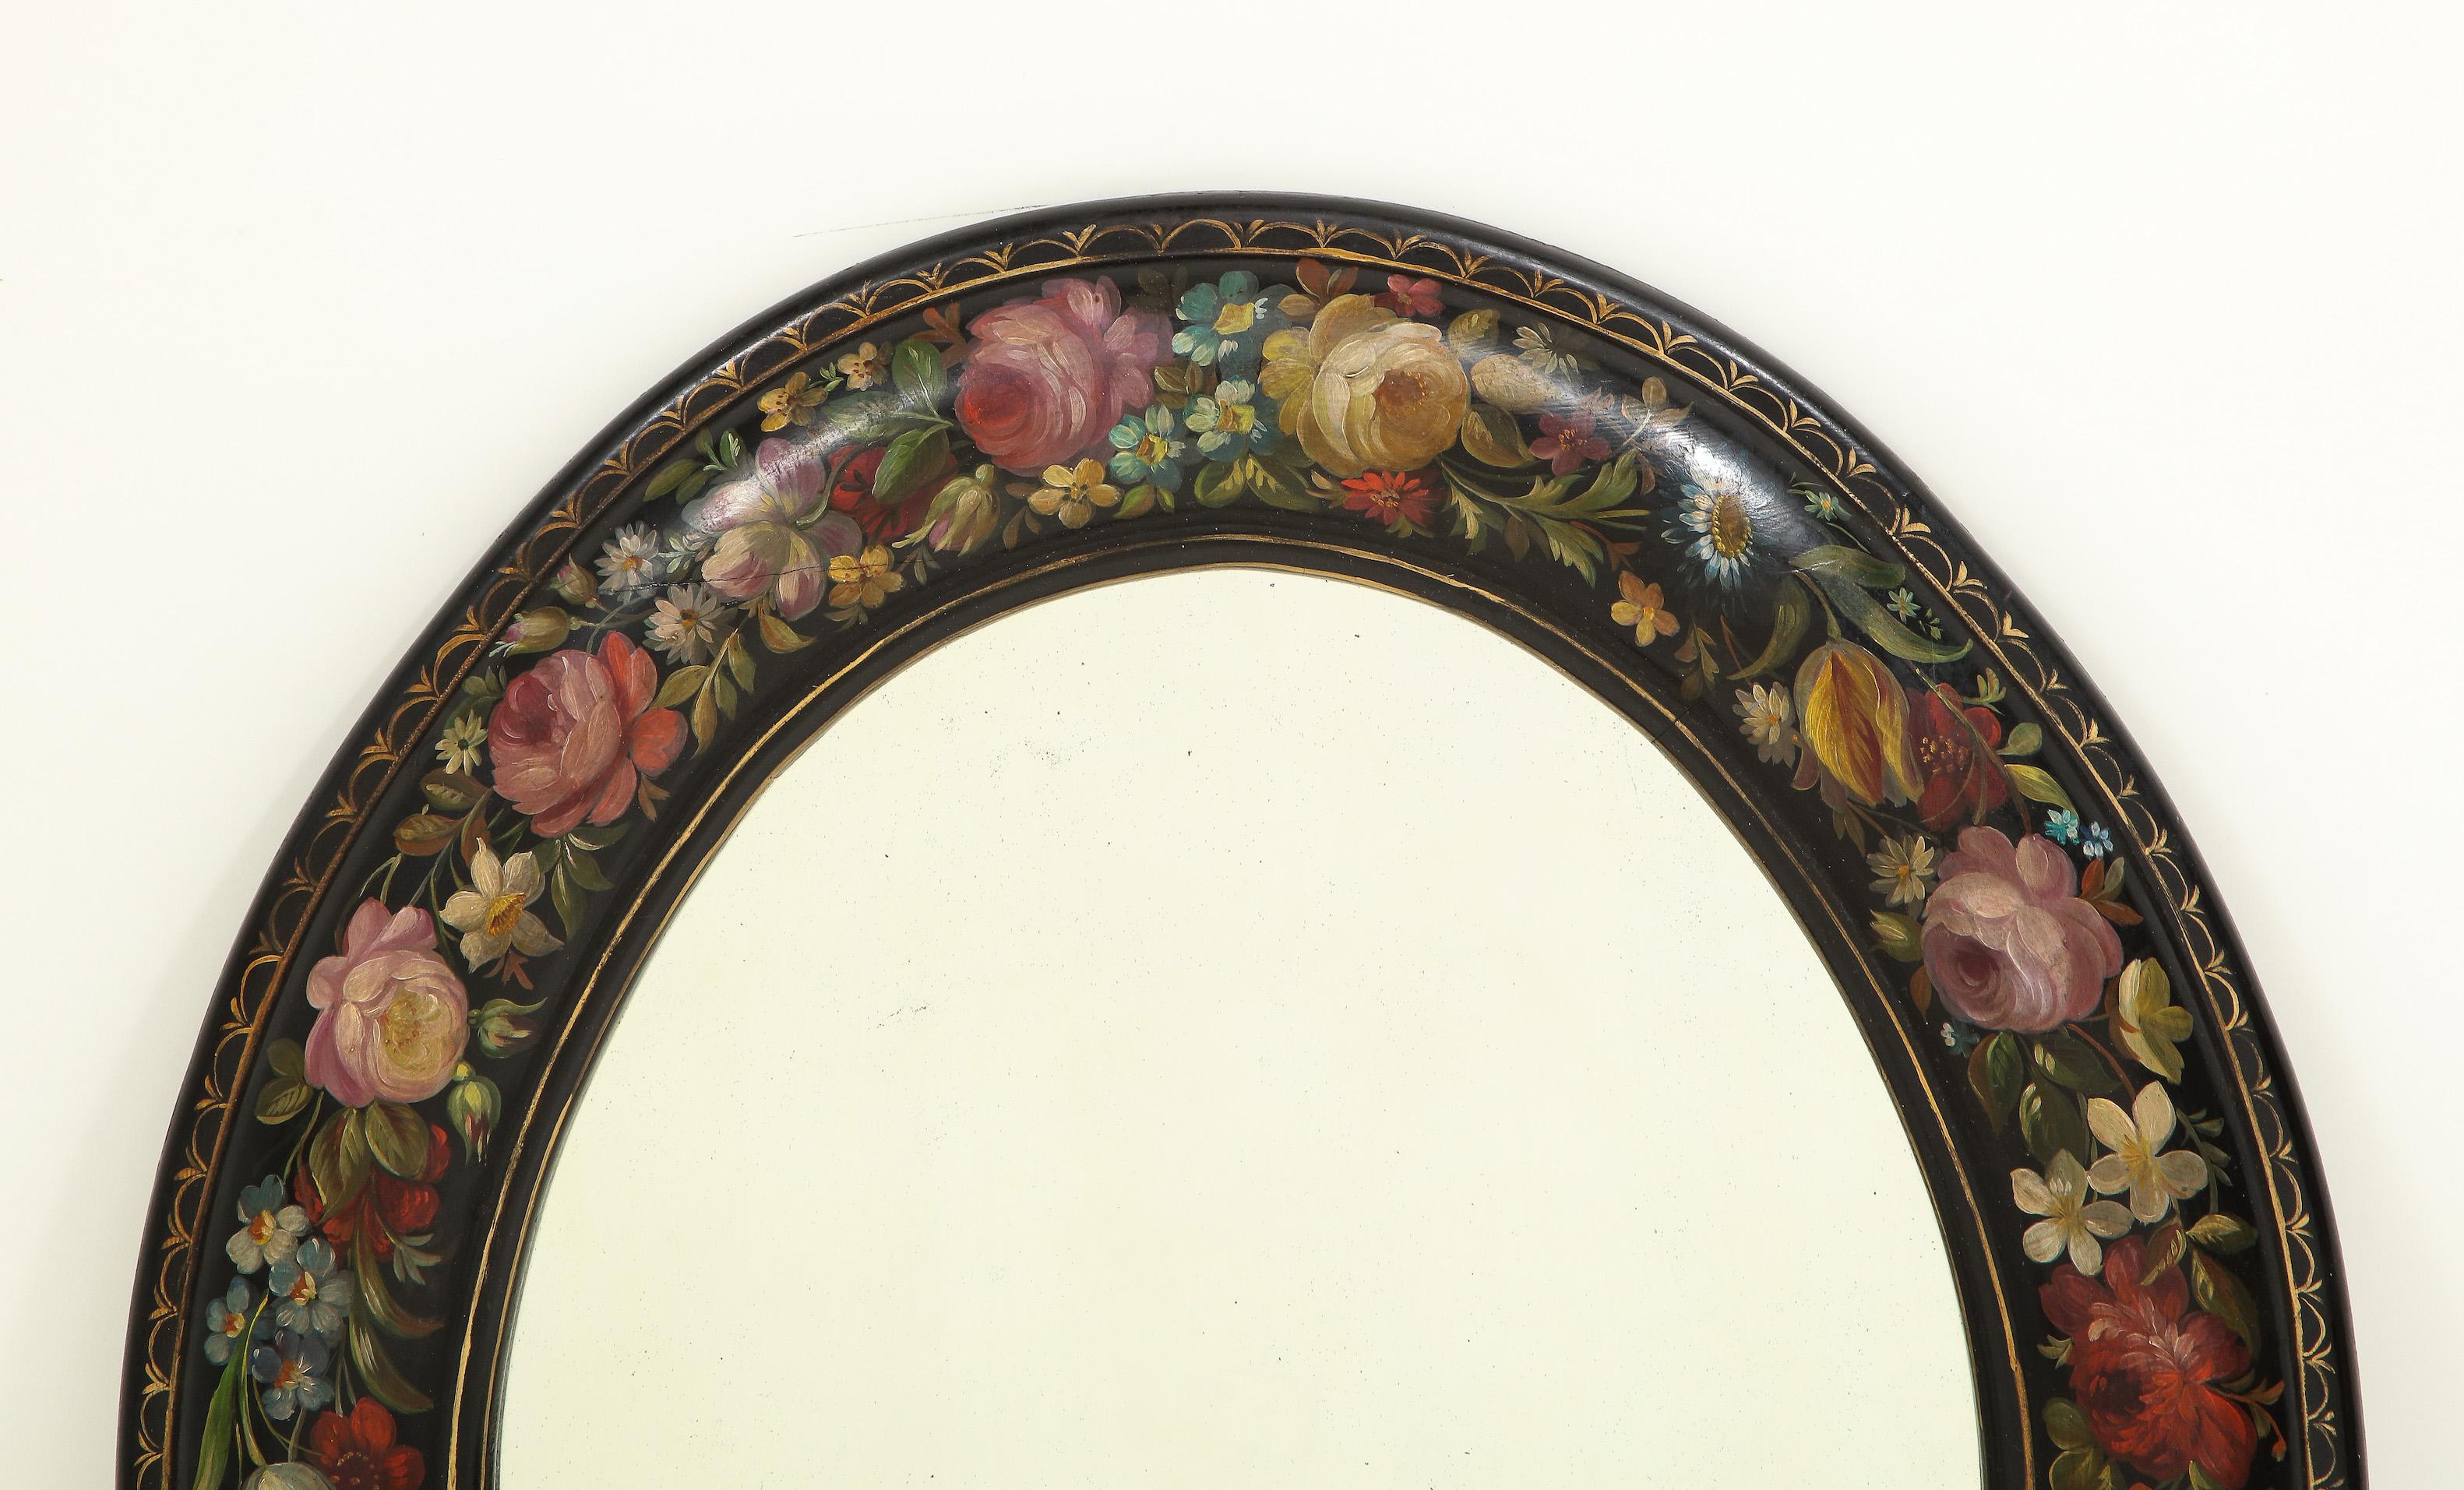 The oval mirrored plate within a cushion frame lushly decorated with roses, daisies, daffodils and other floral sprays with a gilt egg and dart border, on a black ground.